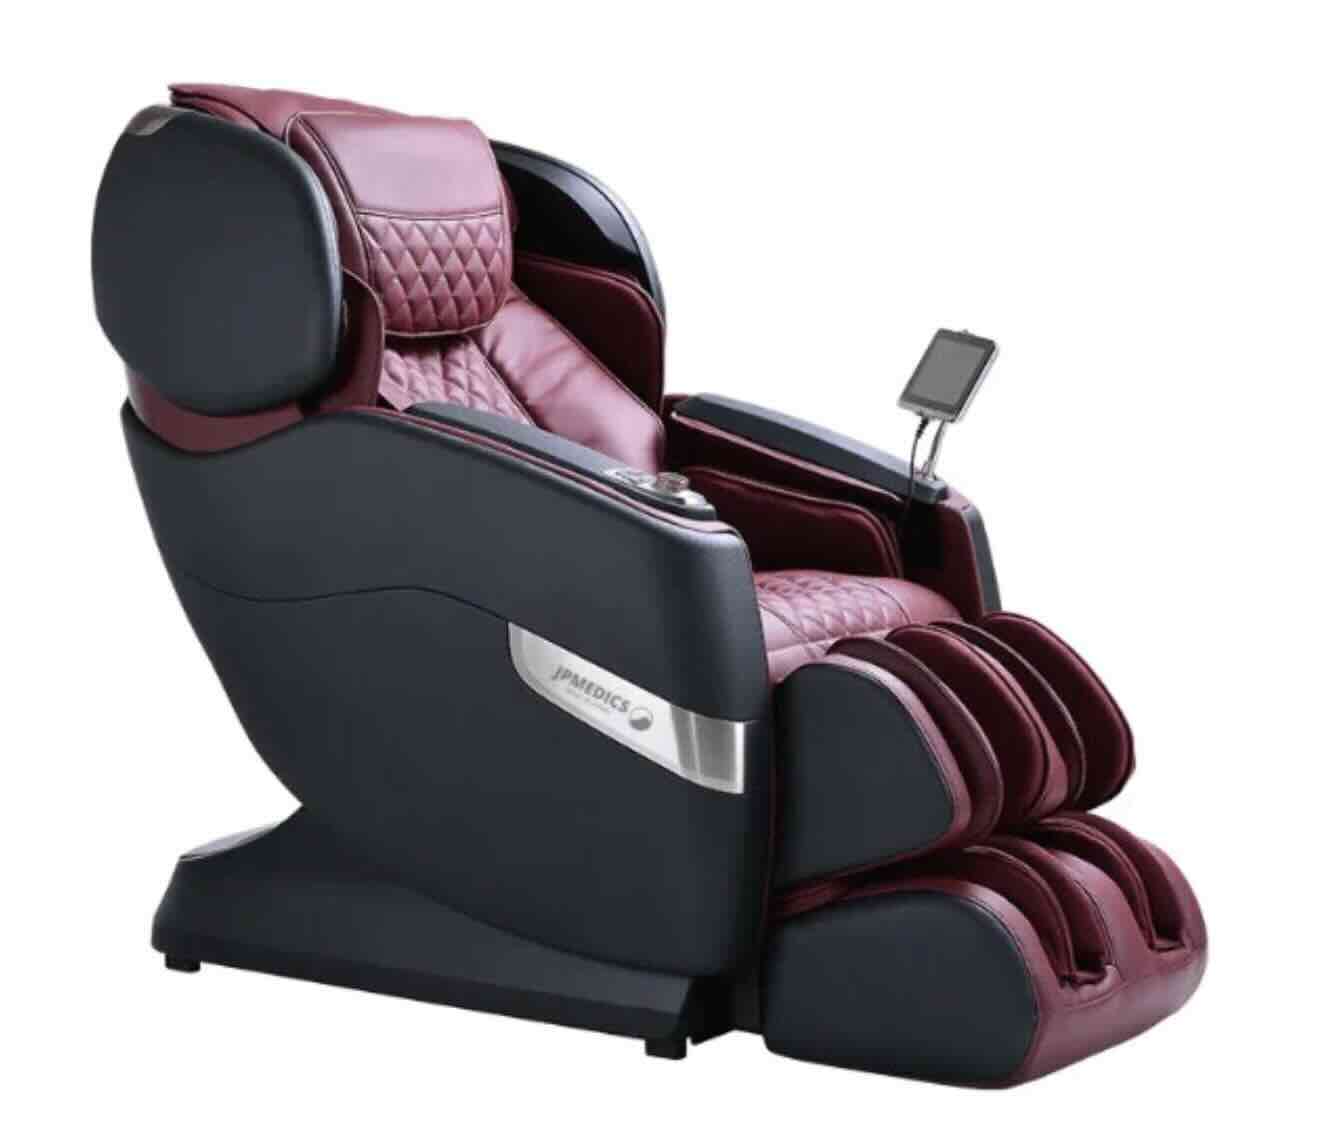 Discover Ultimate Relaxation with the JPMedics Kumo Massage Chair Review